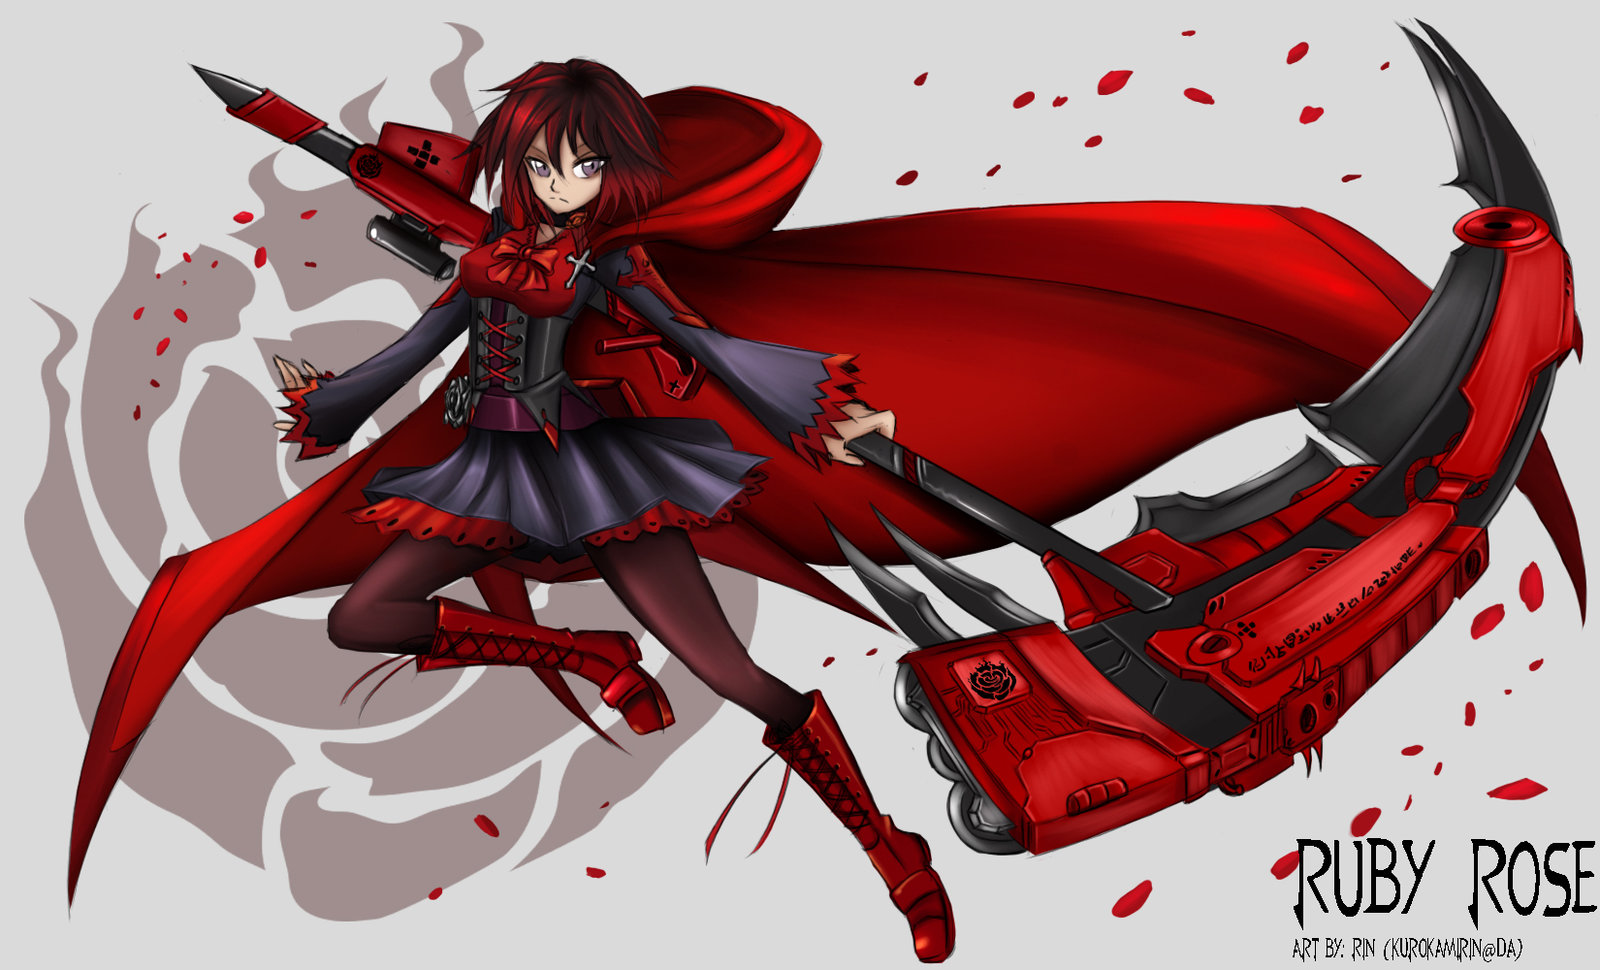 Free Download Rwby Ruby Rose By Kurokamirin 1600x970 For Your Desktop Mobile Tablet Explore 47 Rwby Ruby Rose Wallpaper Rwby Wallpaper Download Rwby Blake Wallpaper Rwby Desktop Wallpaper